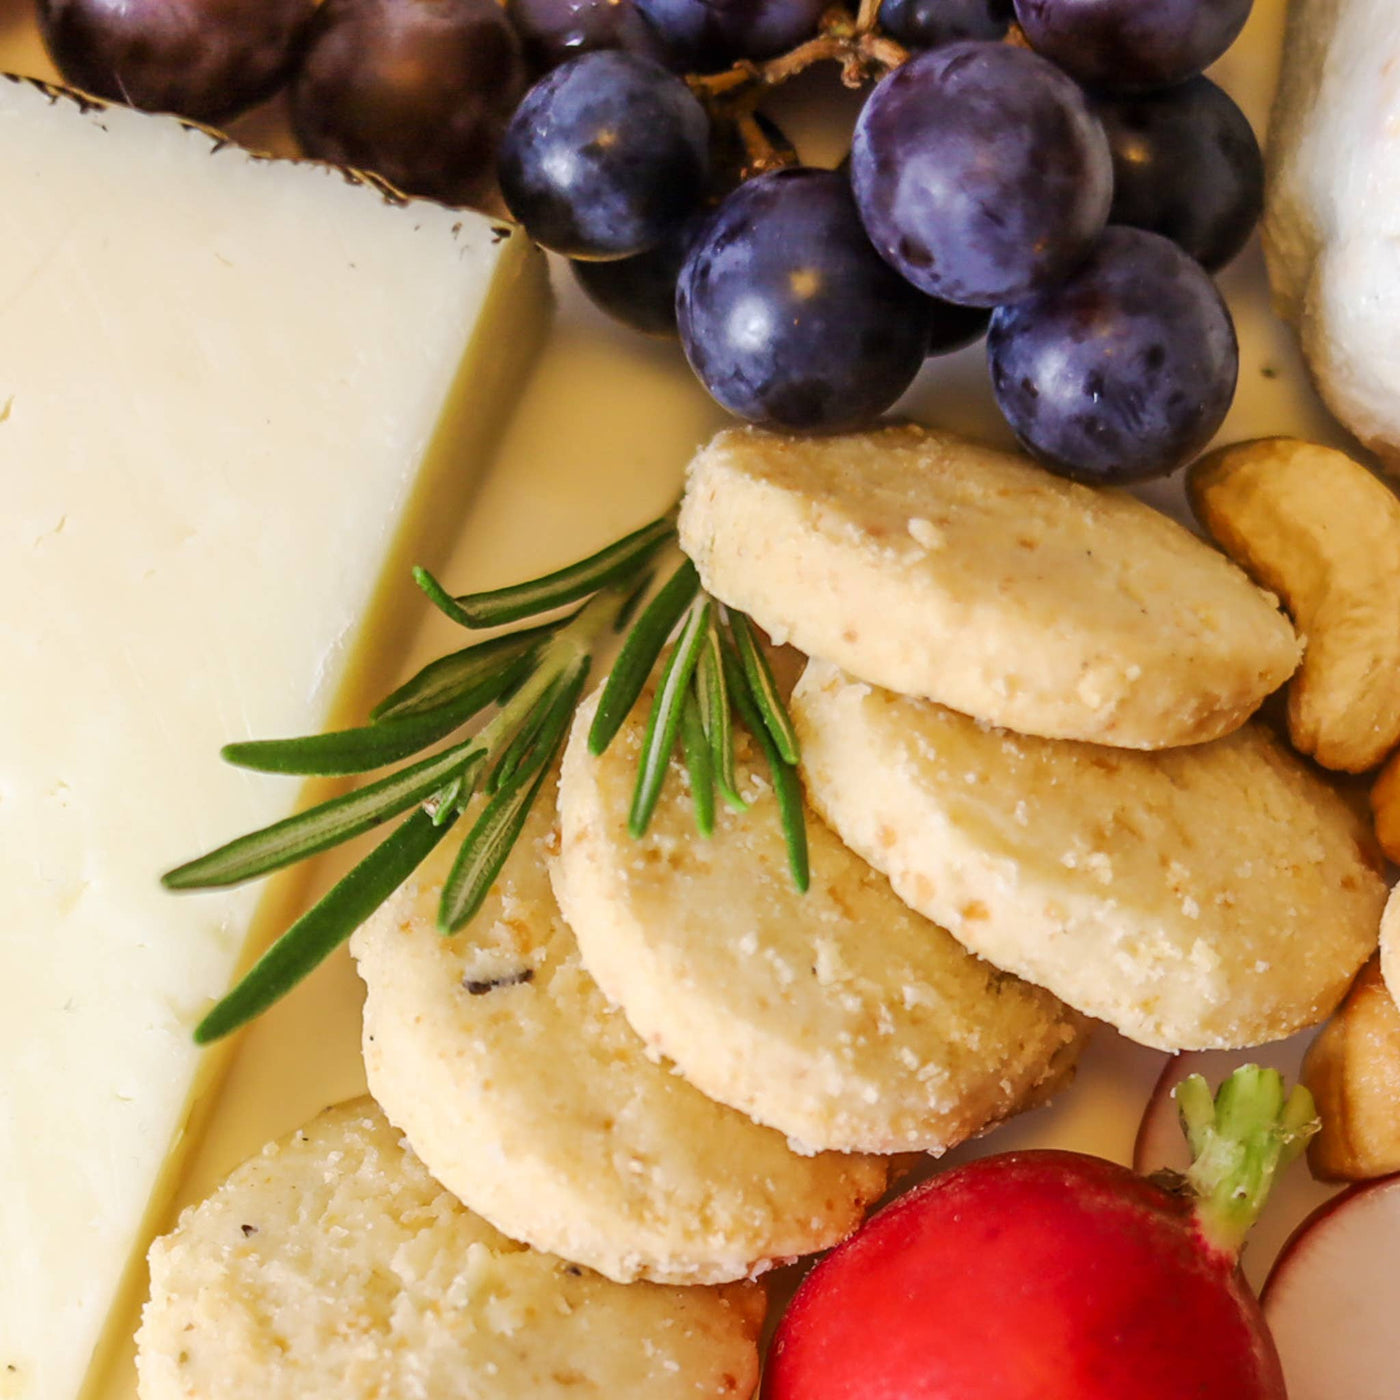 Parmesan & Rosemary Shortbreads - The Local Space